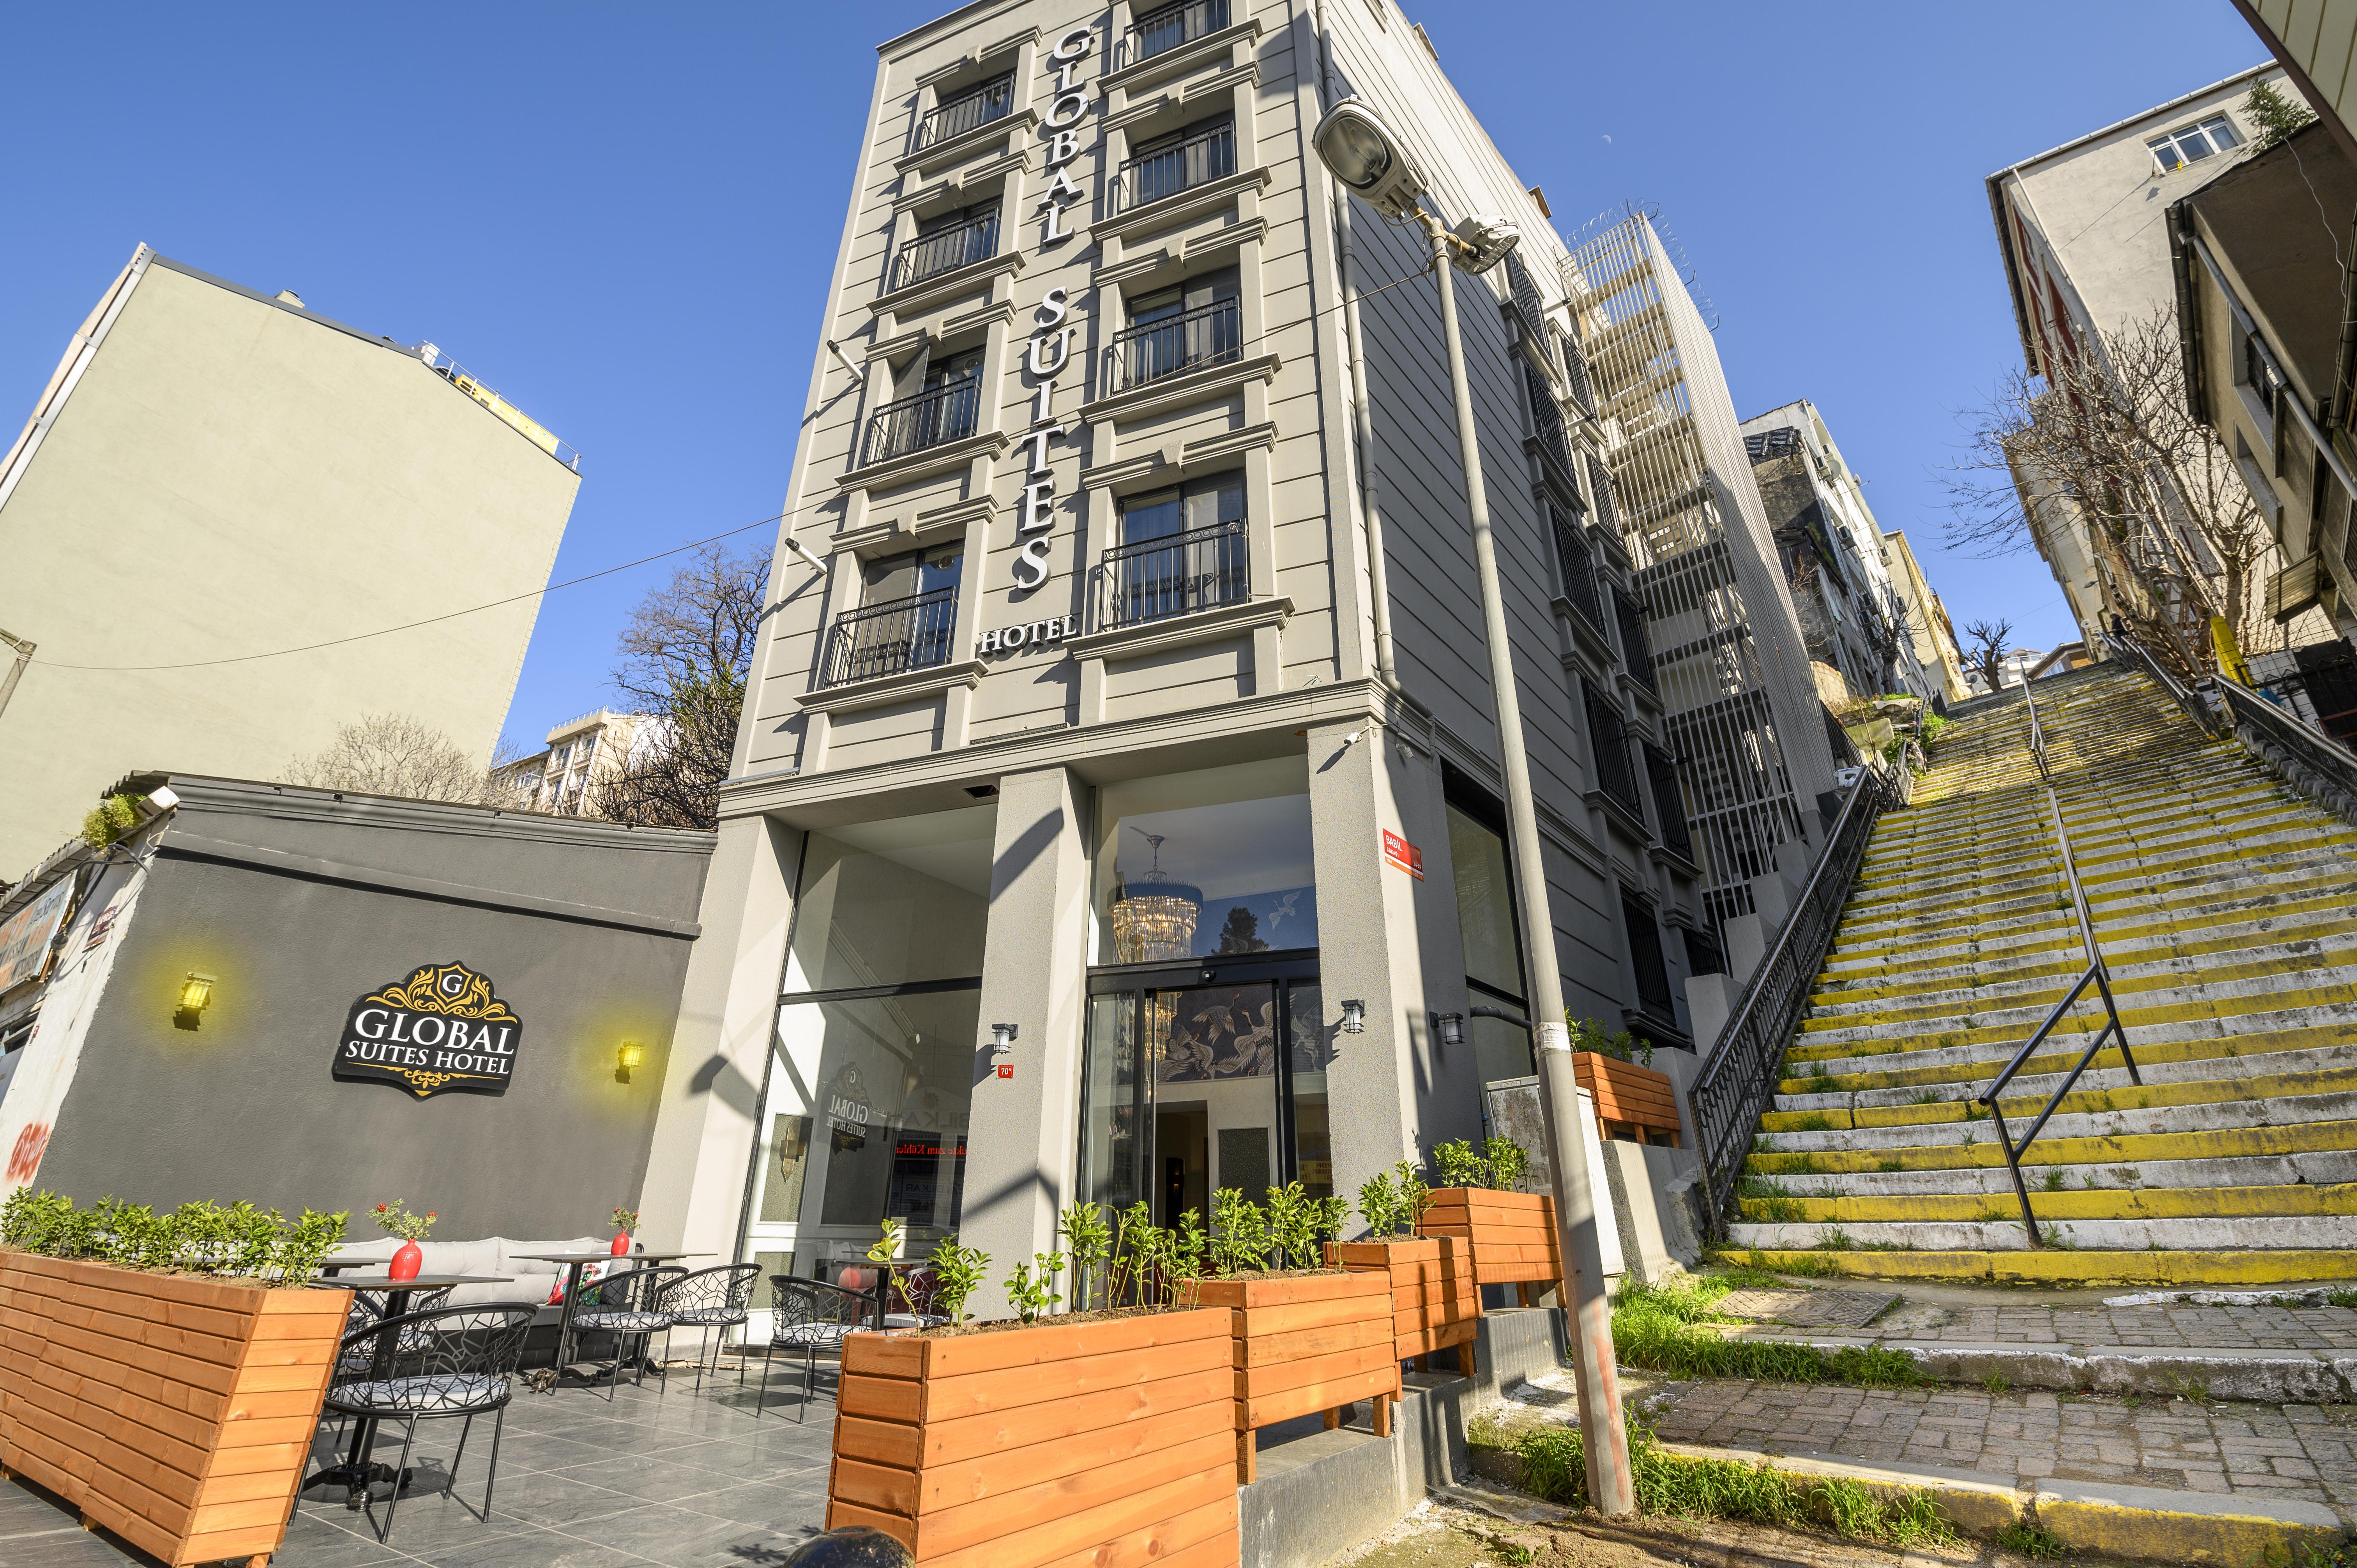 Global Suites Hotel Istanbul Exterior photo